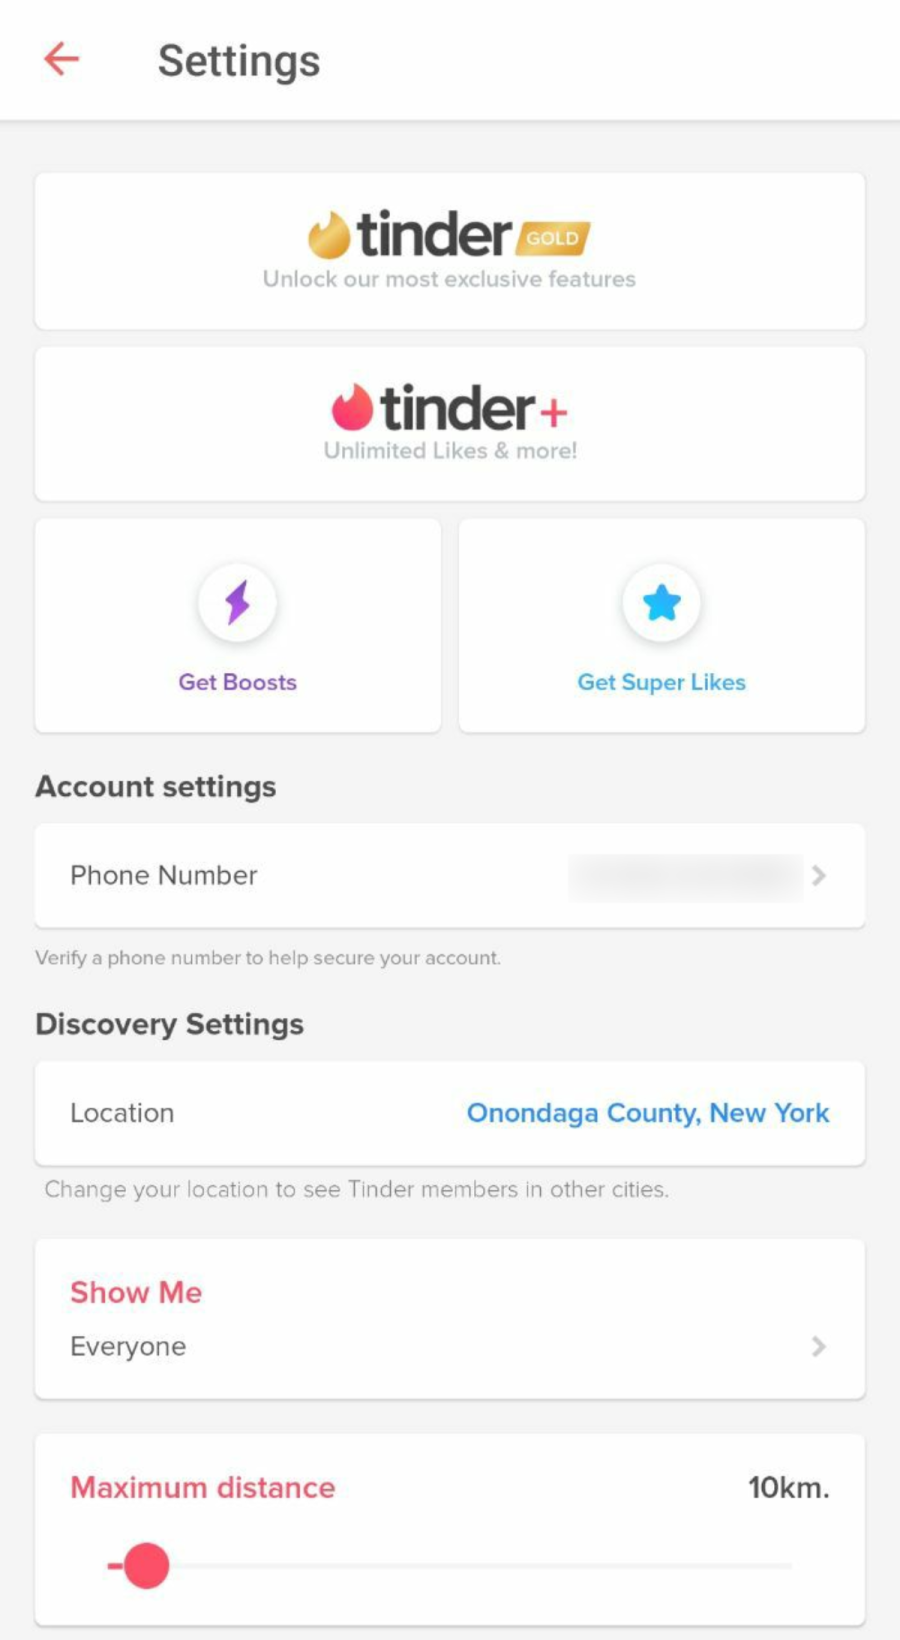 Do You Need to Pay Tinder for It to Work Properly?